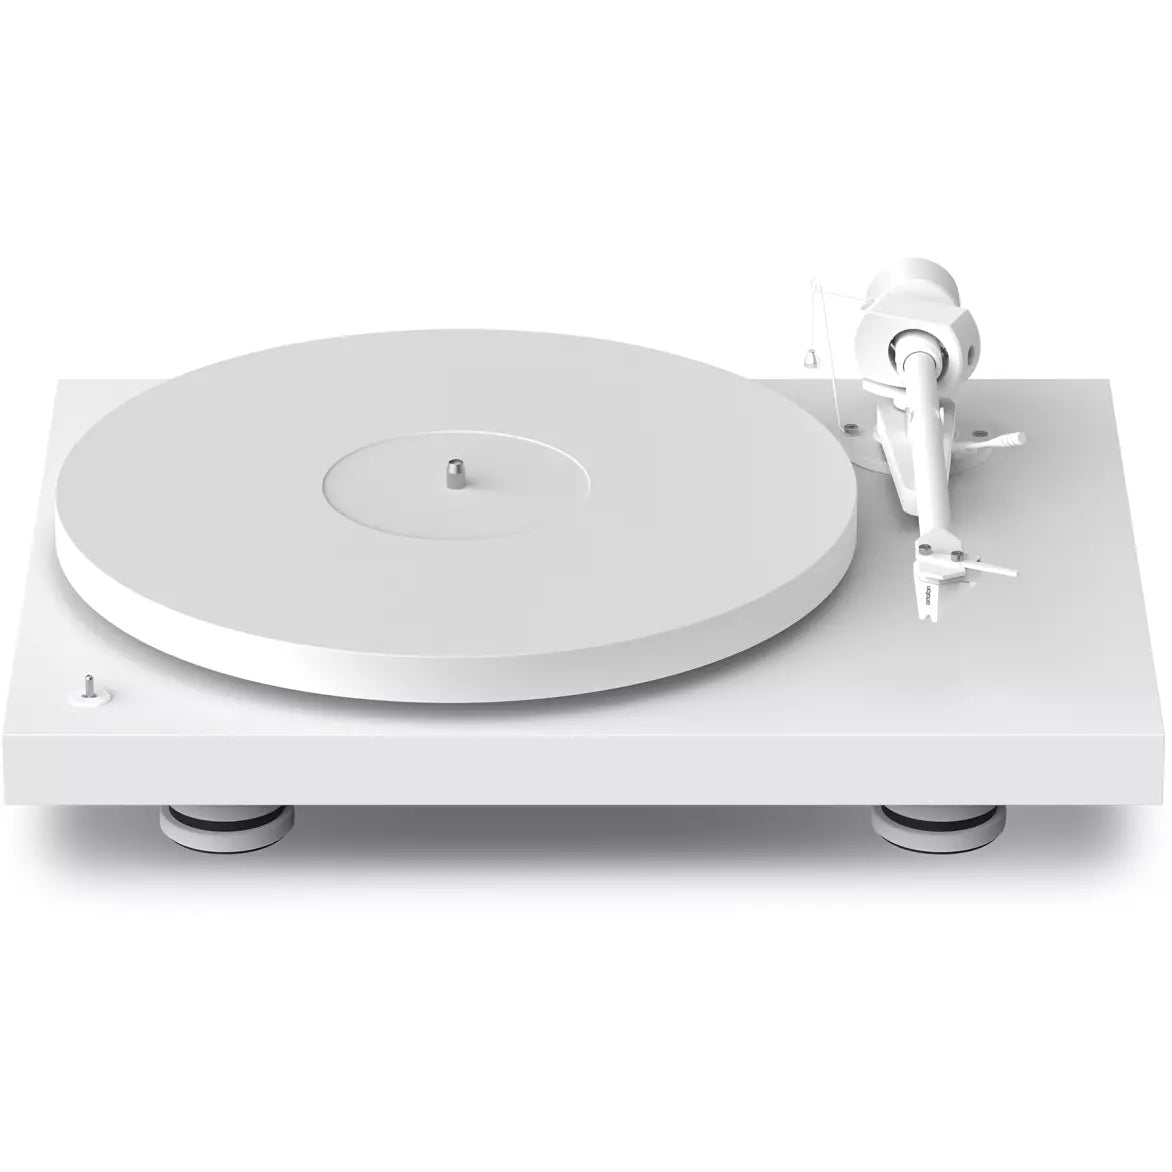 Pro-Ject Debut Pro - Limited Edition Satin White